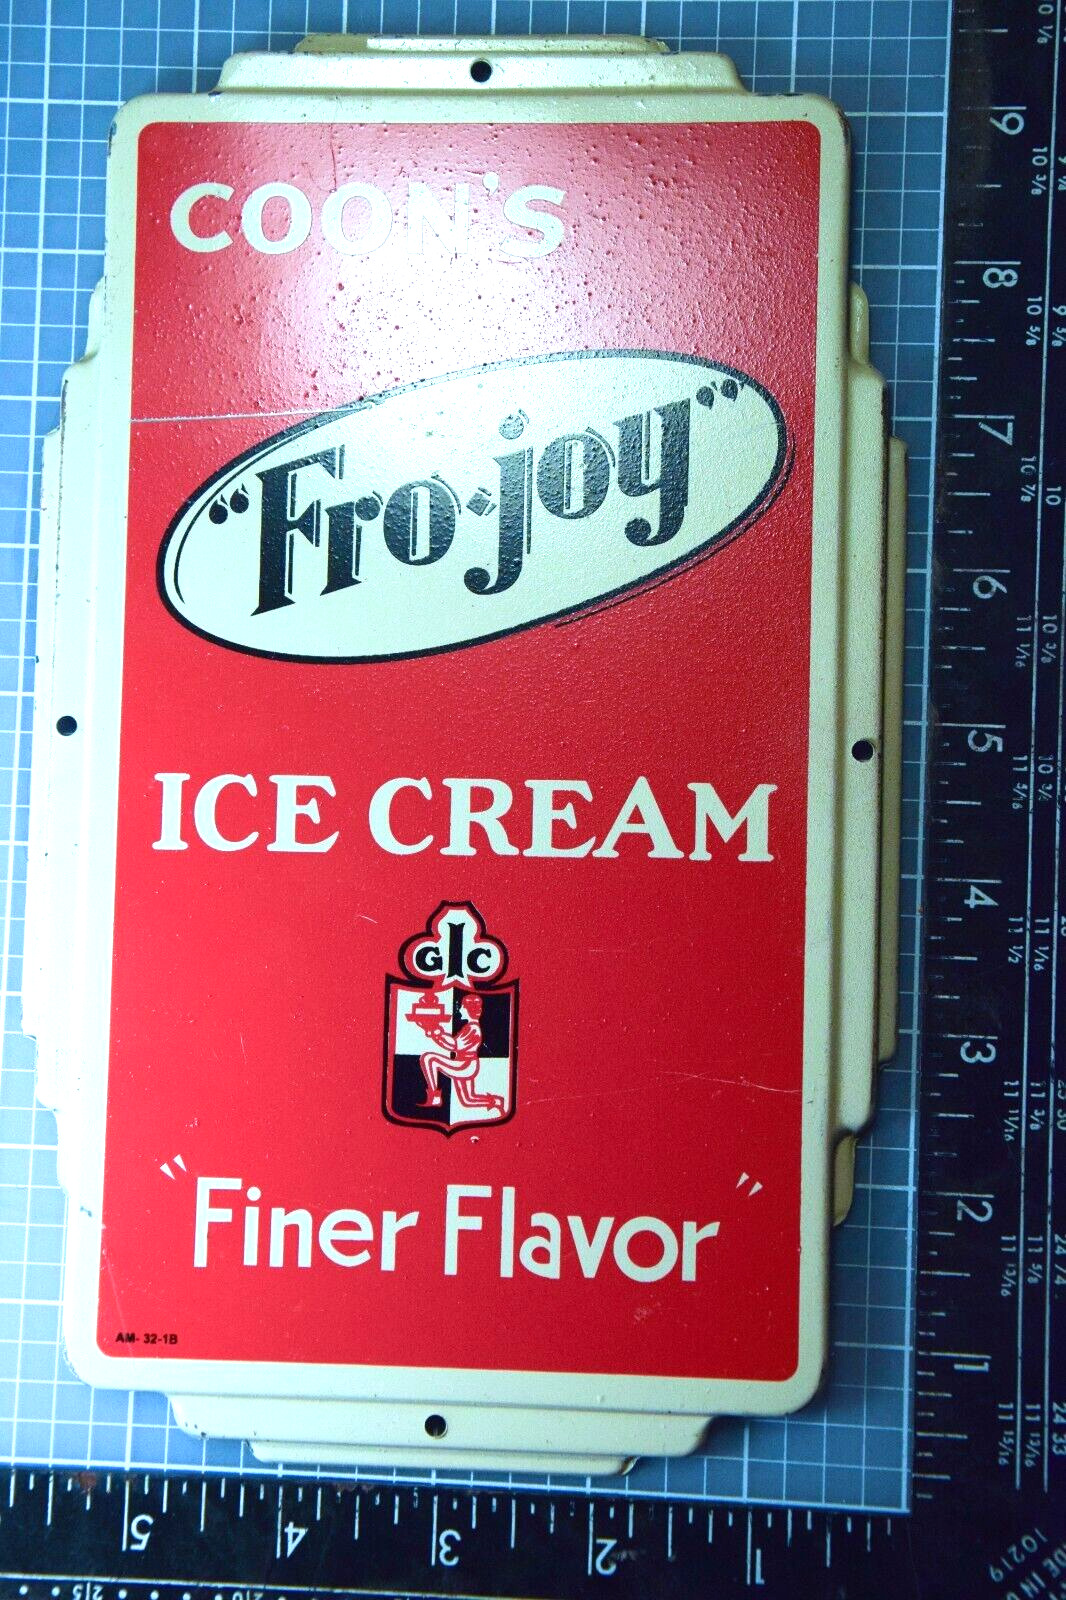 RARE 1930s COON'S FRO JOY ICE CREAM STAMPED PAINTED METAL SIGN MILK DAIRY COW